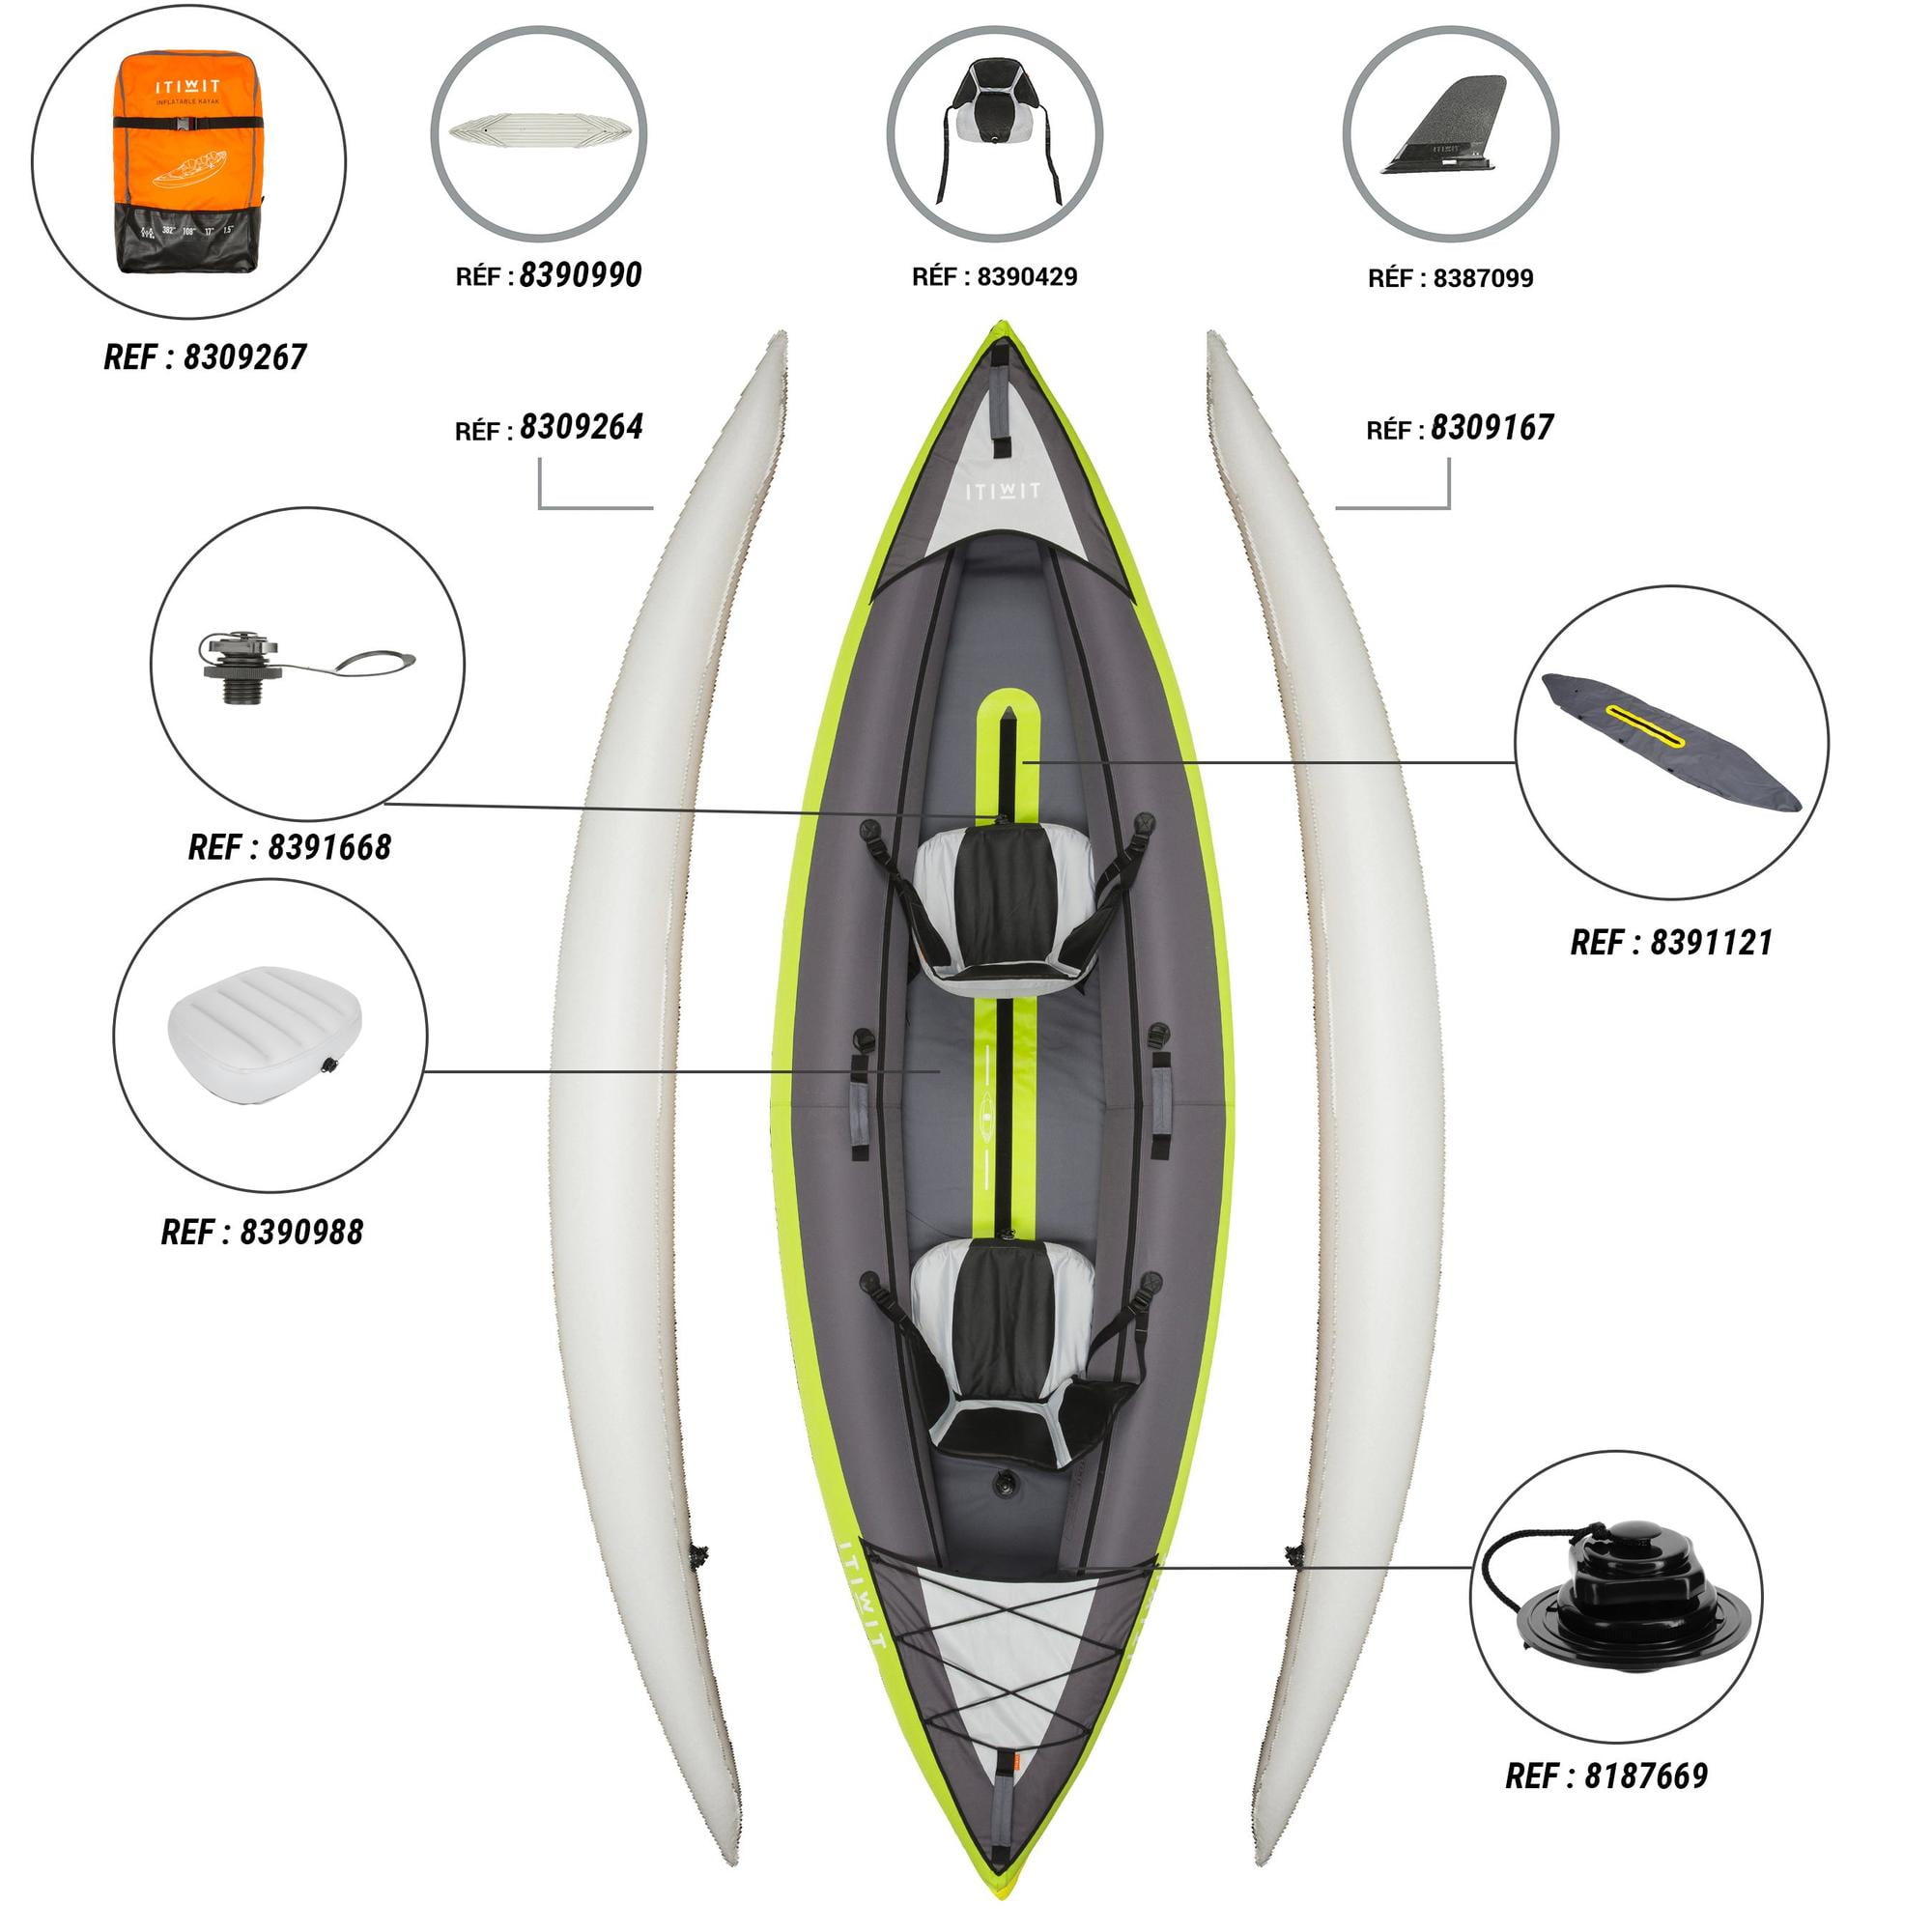 Decathlon Inflatable Recreational Sit Kayak with Pump, 1 or 2 Person, Green - Walmart.com